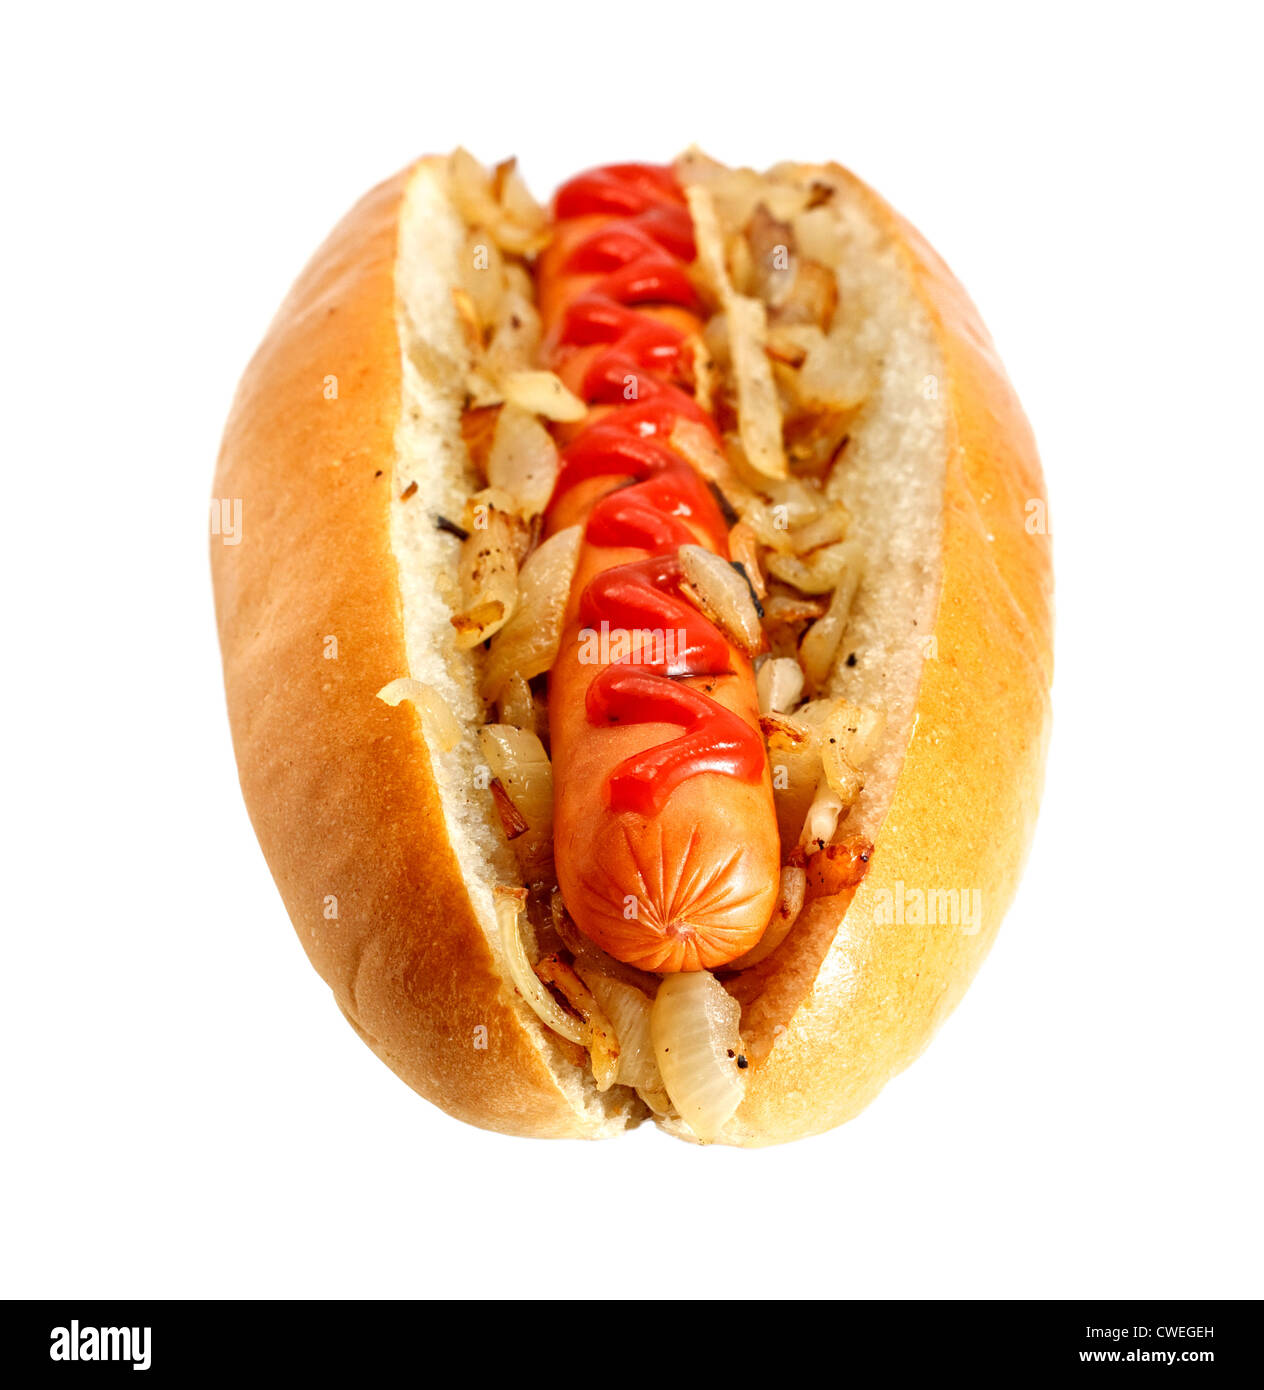 Grilled Hot dog or Wiener with fried onions and ketchup topping, the ultimate classic fast food Stock Photo